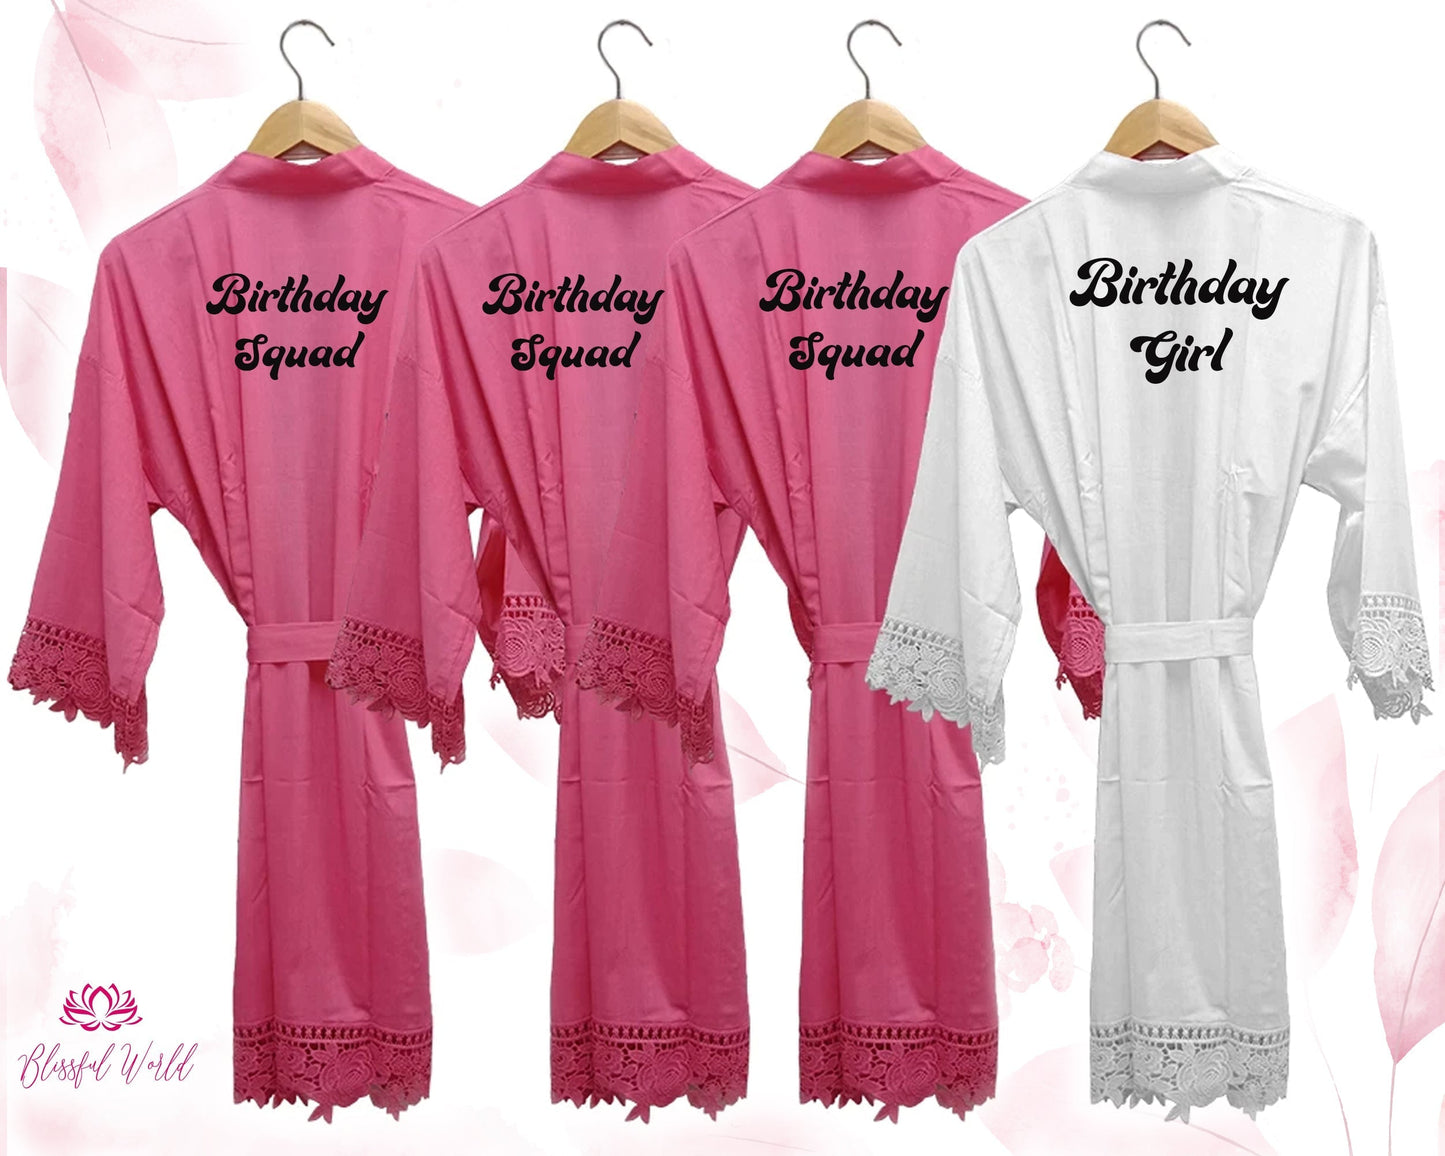 Bridesmaid Robes Rayon Cotton With Lace Trim | Bridal Party Robes | Personalized Bridesmaid Gifts | Bridal Shower Gift | Bridal Robes / Robes / Cotton Lace Robe